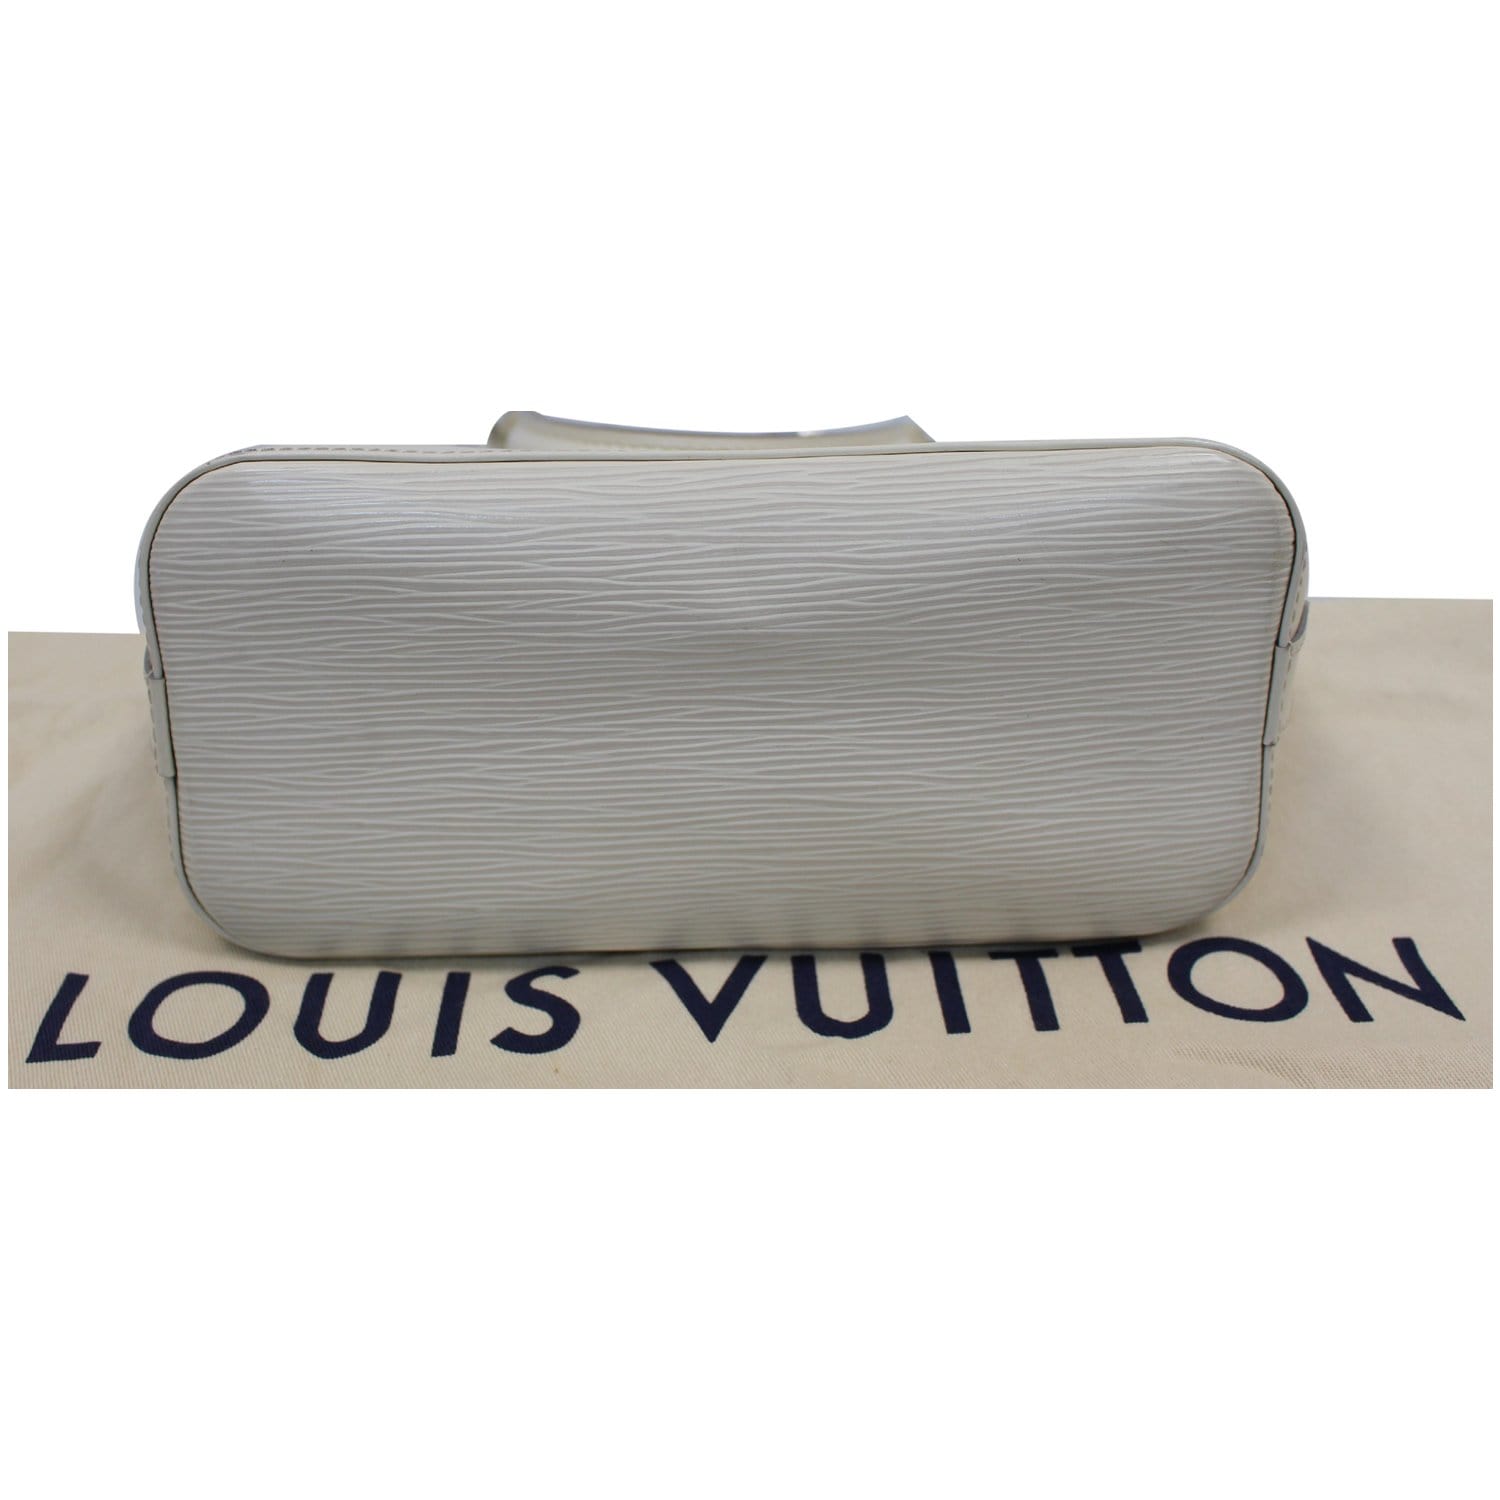 Louis Vuitton Epi Leather Lockit Bag with Strap at Jill's Consignment